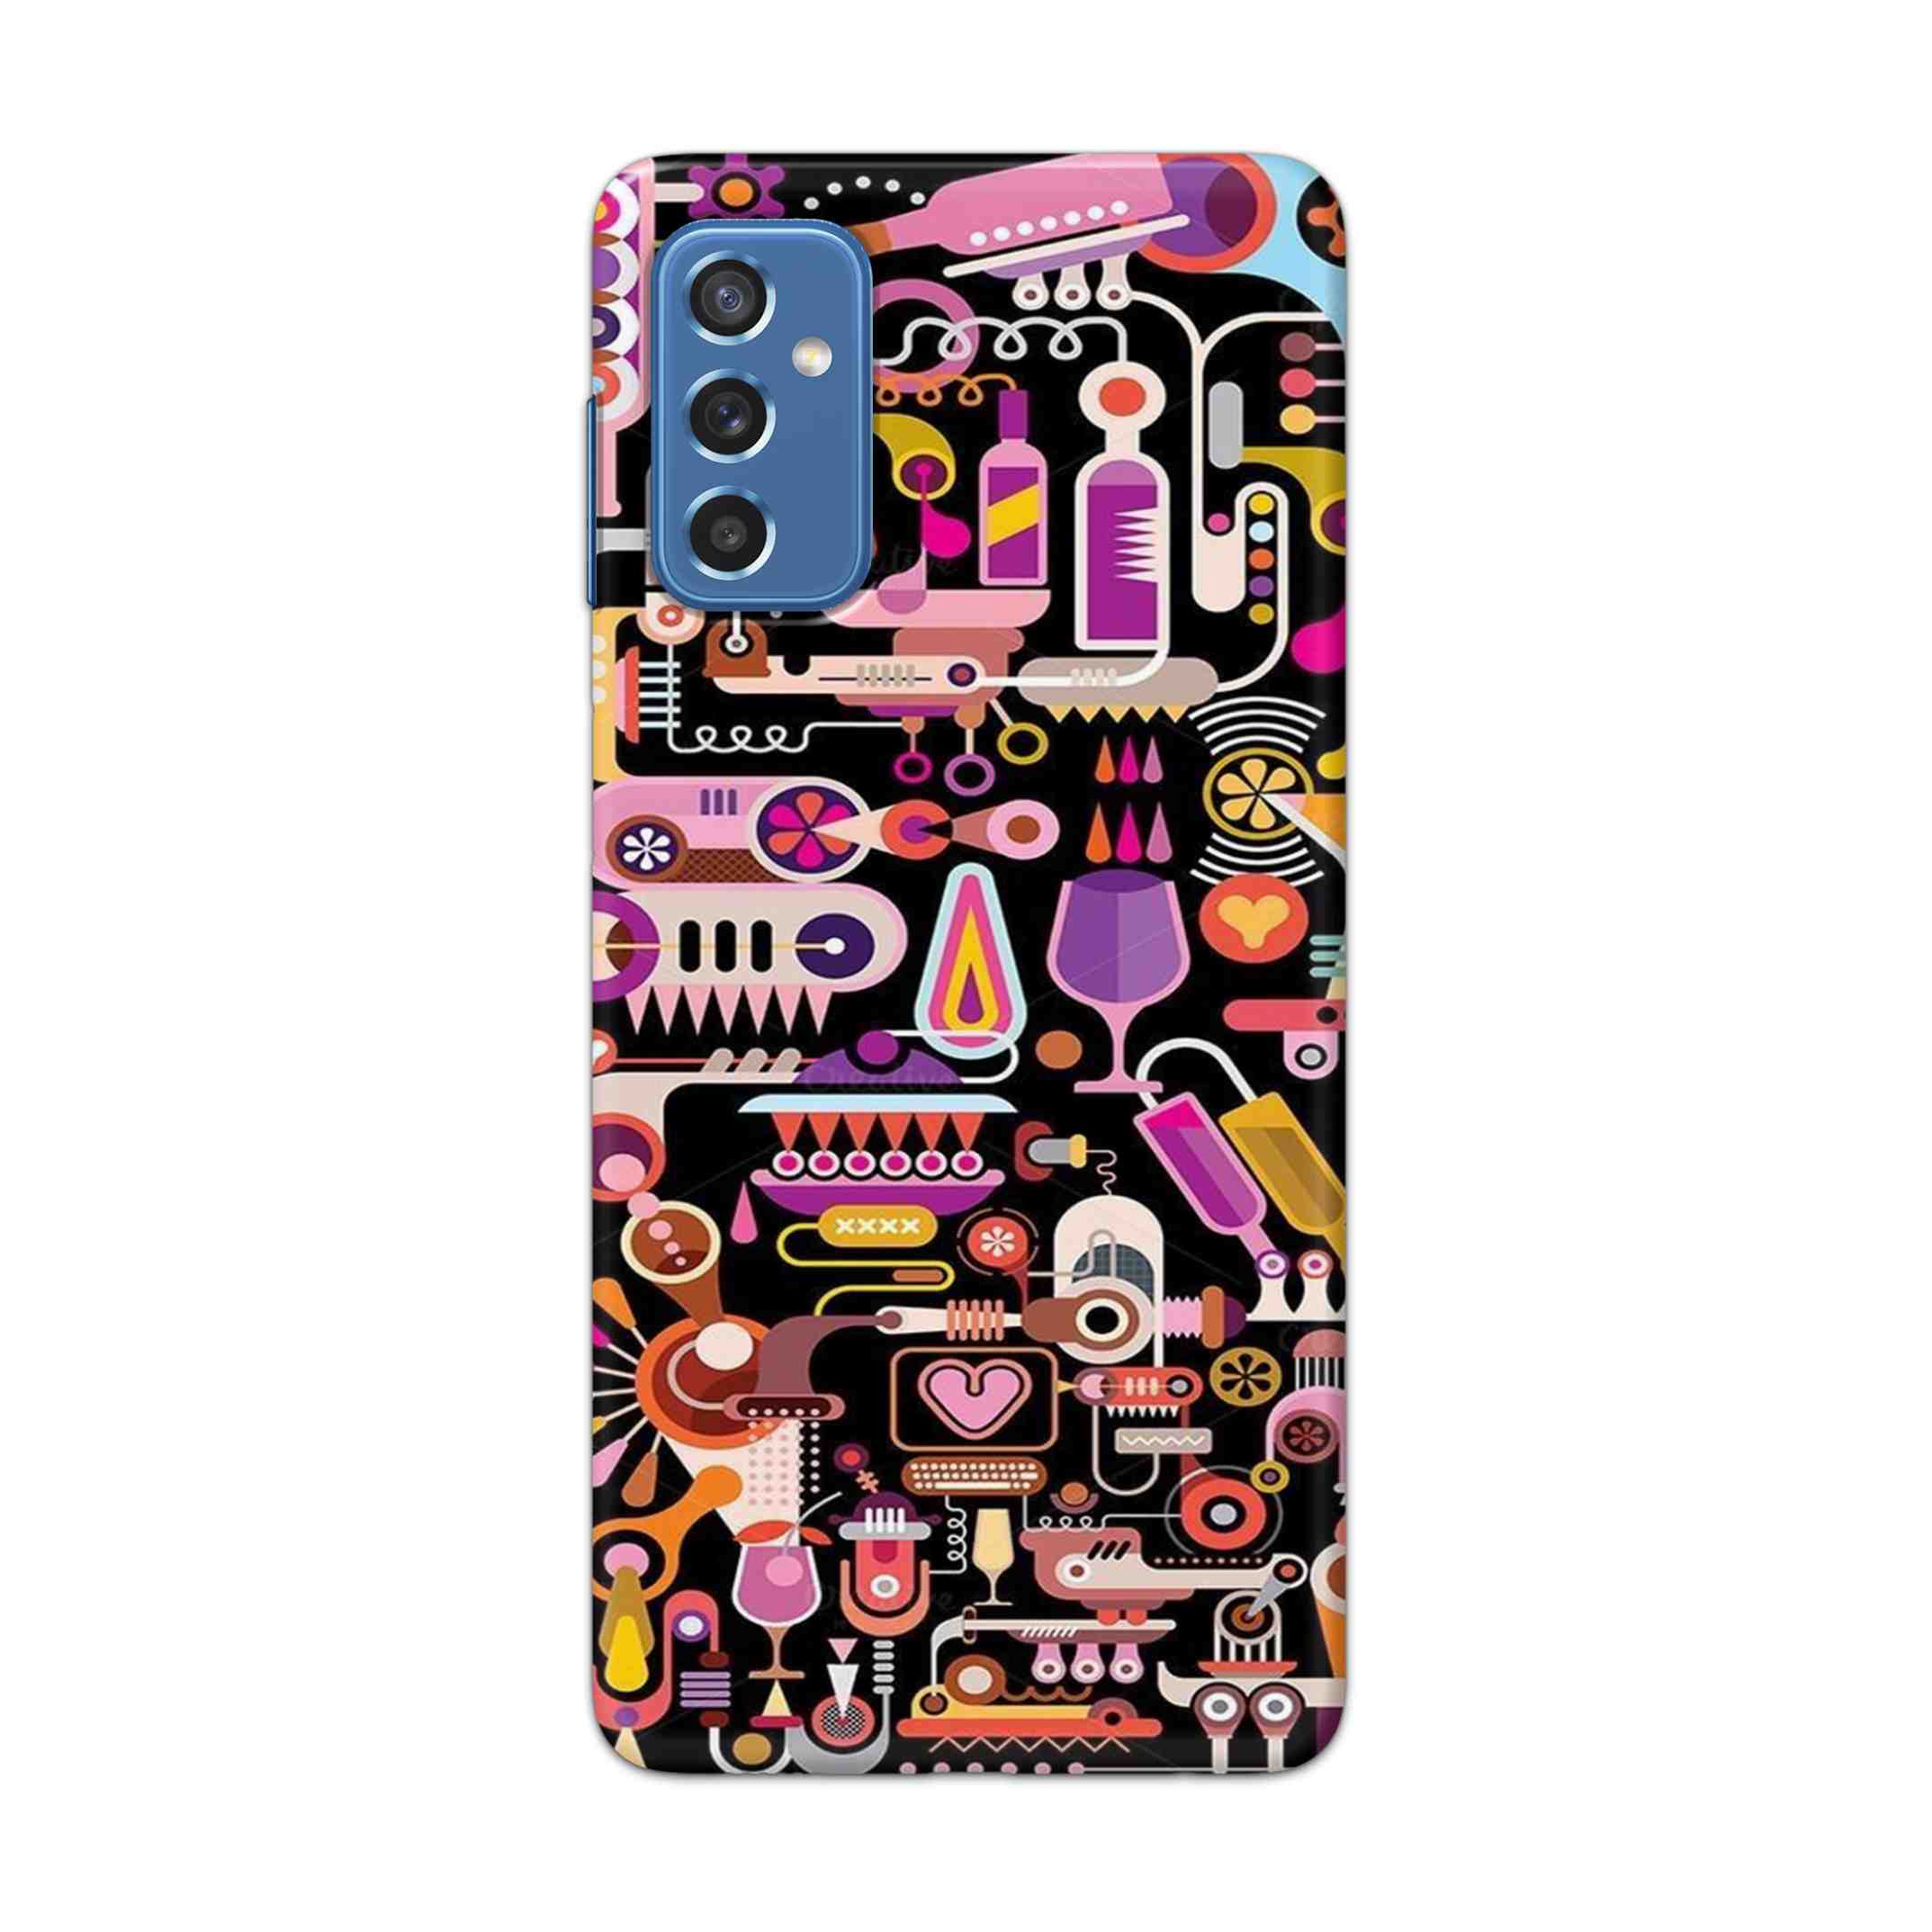 Buy Lab Art Hard Back Mobile Phone Case Cover For Samsung Galaxy M52 Online